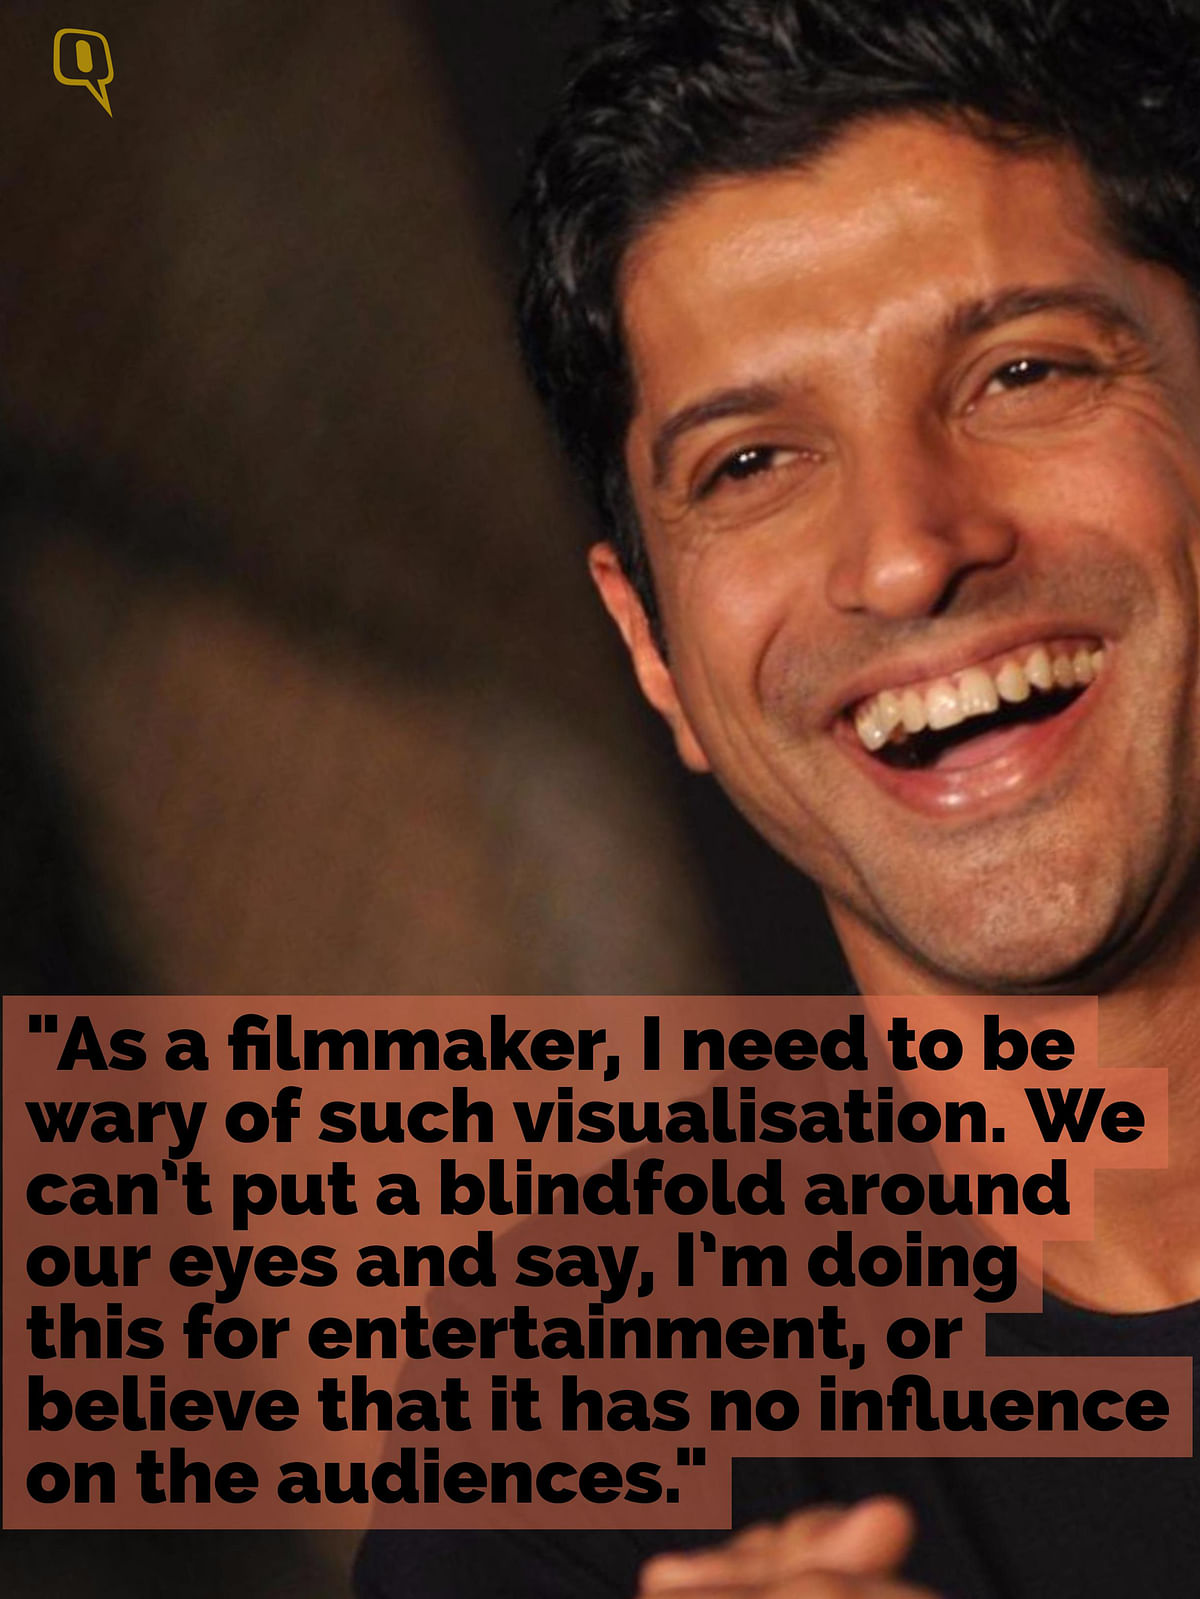 Farhan Akhtar points out the purpose of cinema as being more than just a form of entertainment.